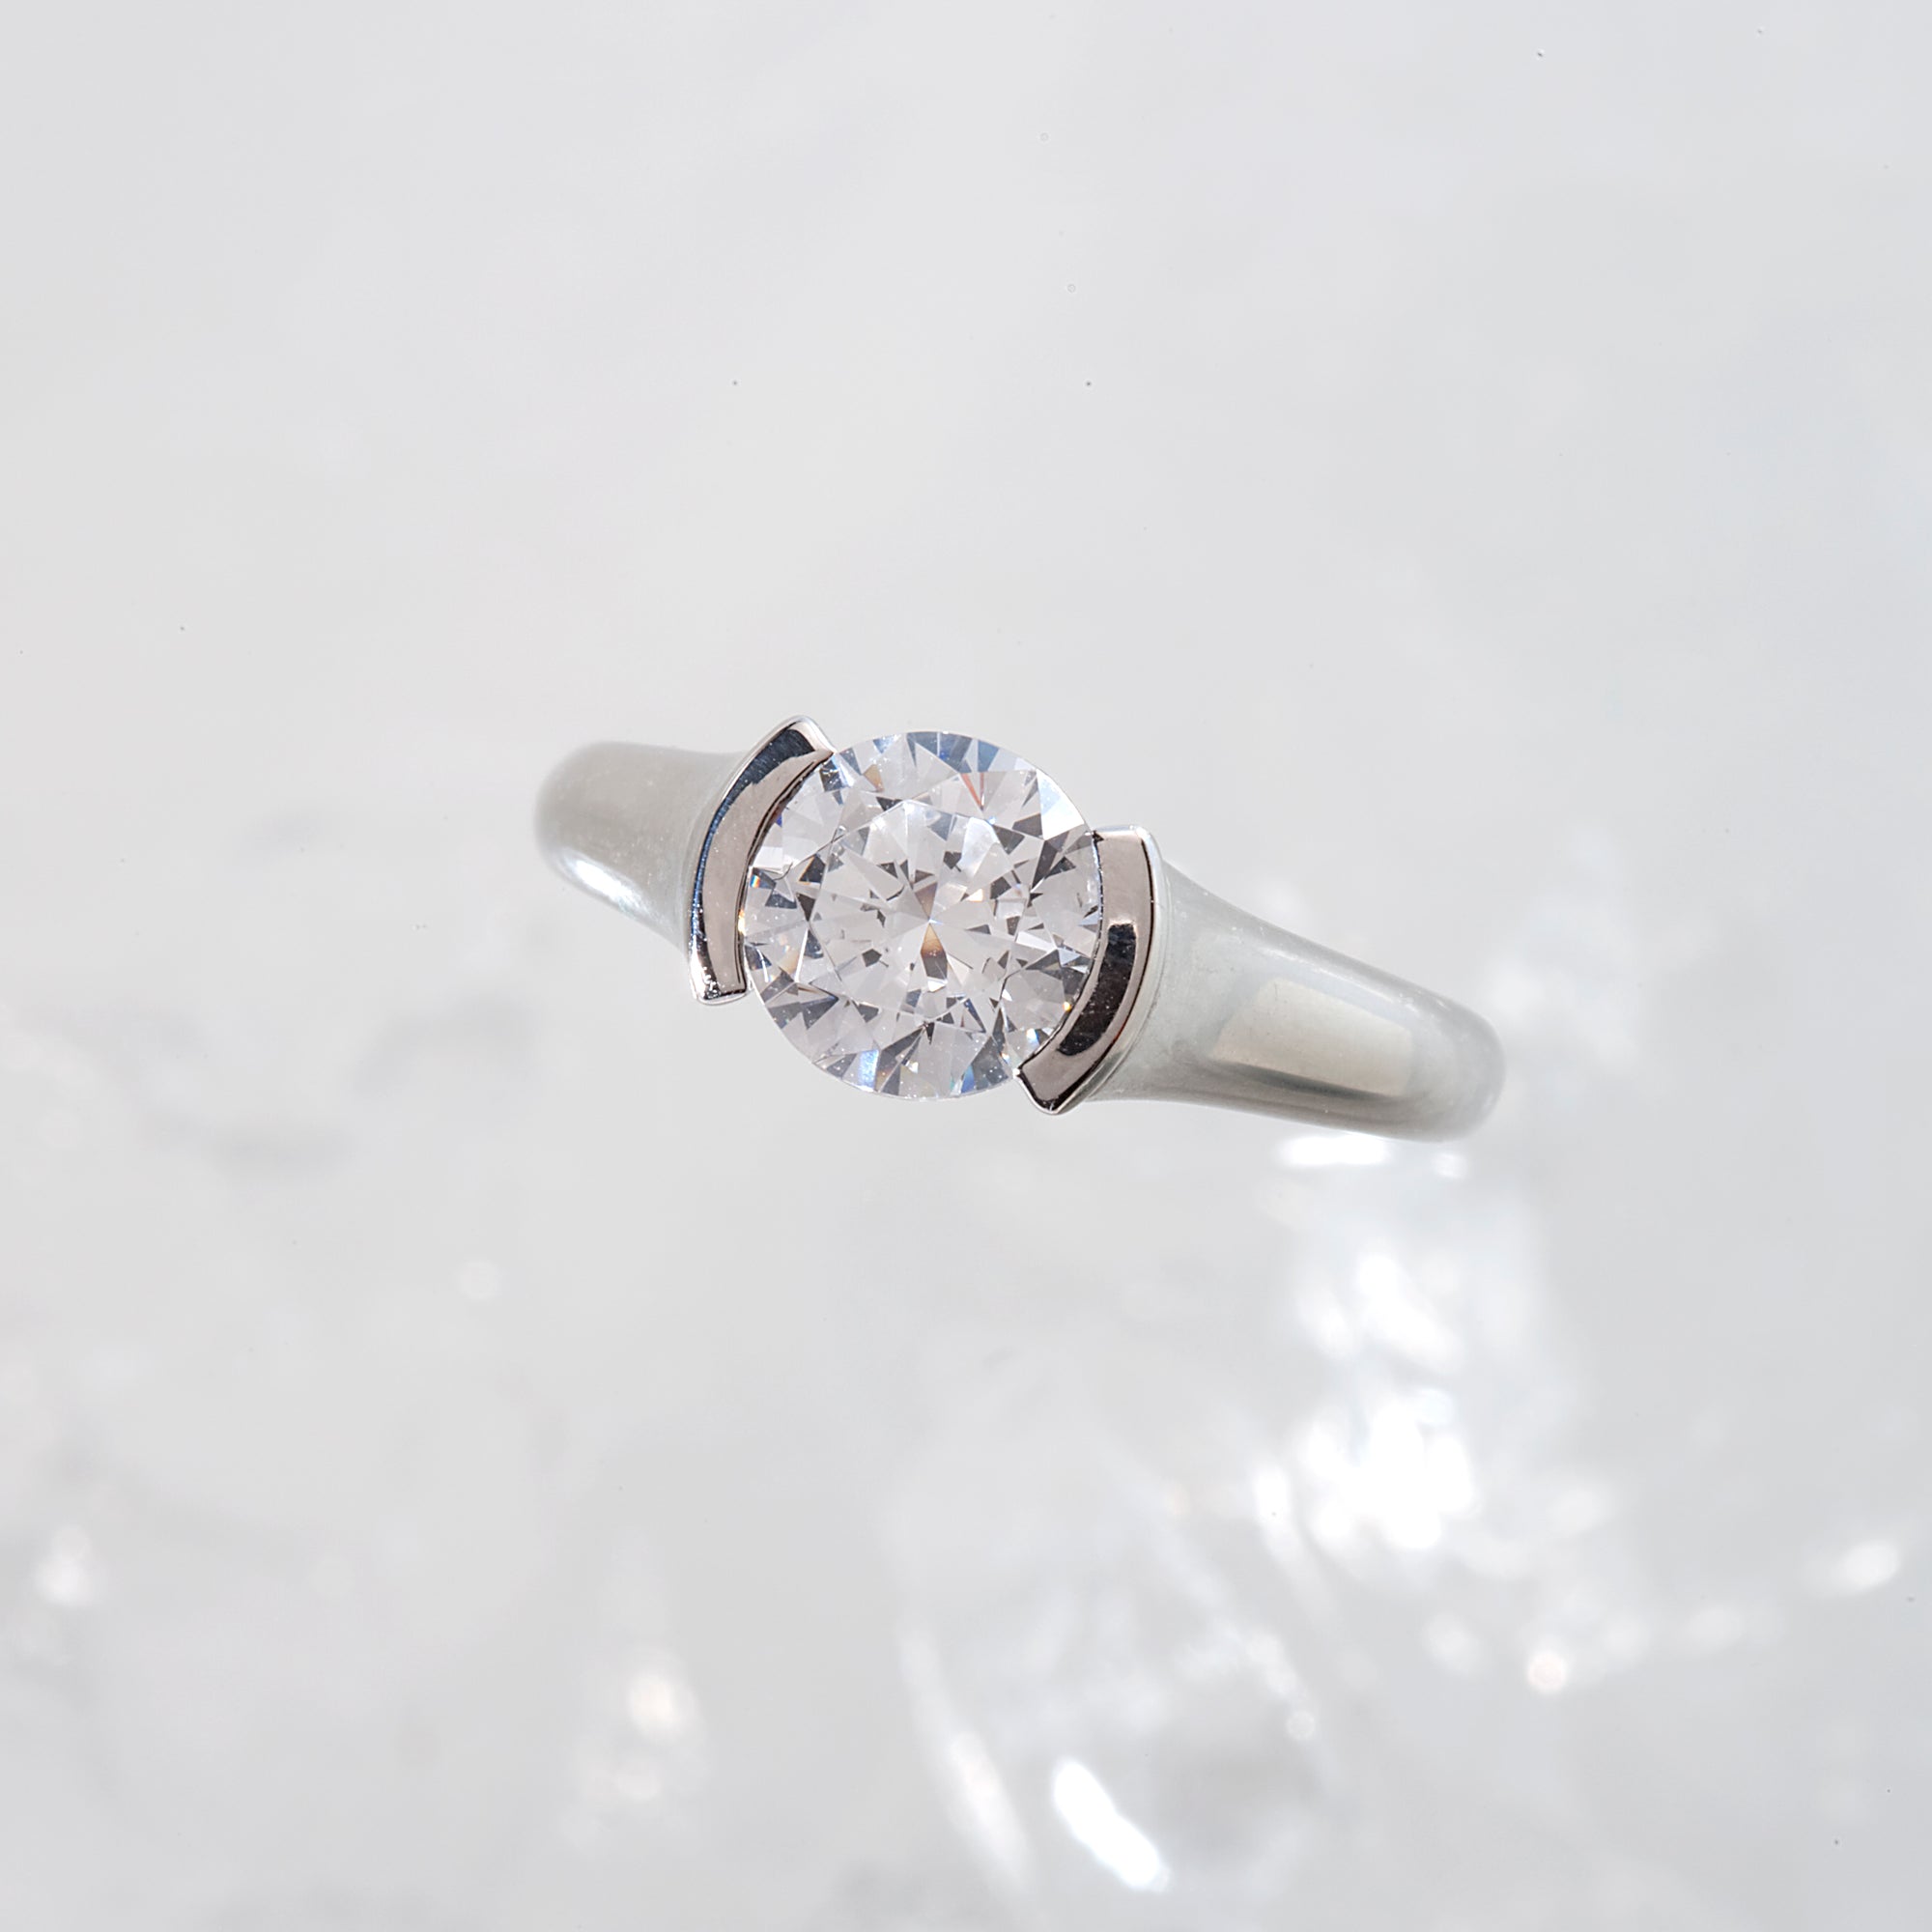 Diamond engagement ring featuring a round brilliant-cut diamond. and channel-set princess-cut diamonds. Custom-made to order for any size diamond or gemstone center stone. Available in 14K or 18K white, yellow, rose gold, and platinum. 